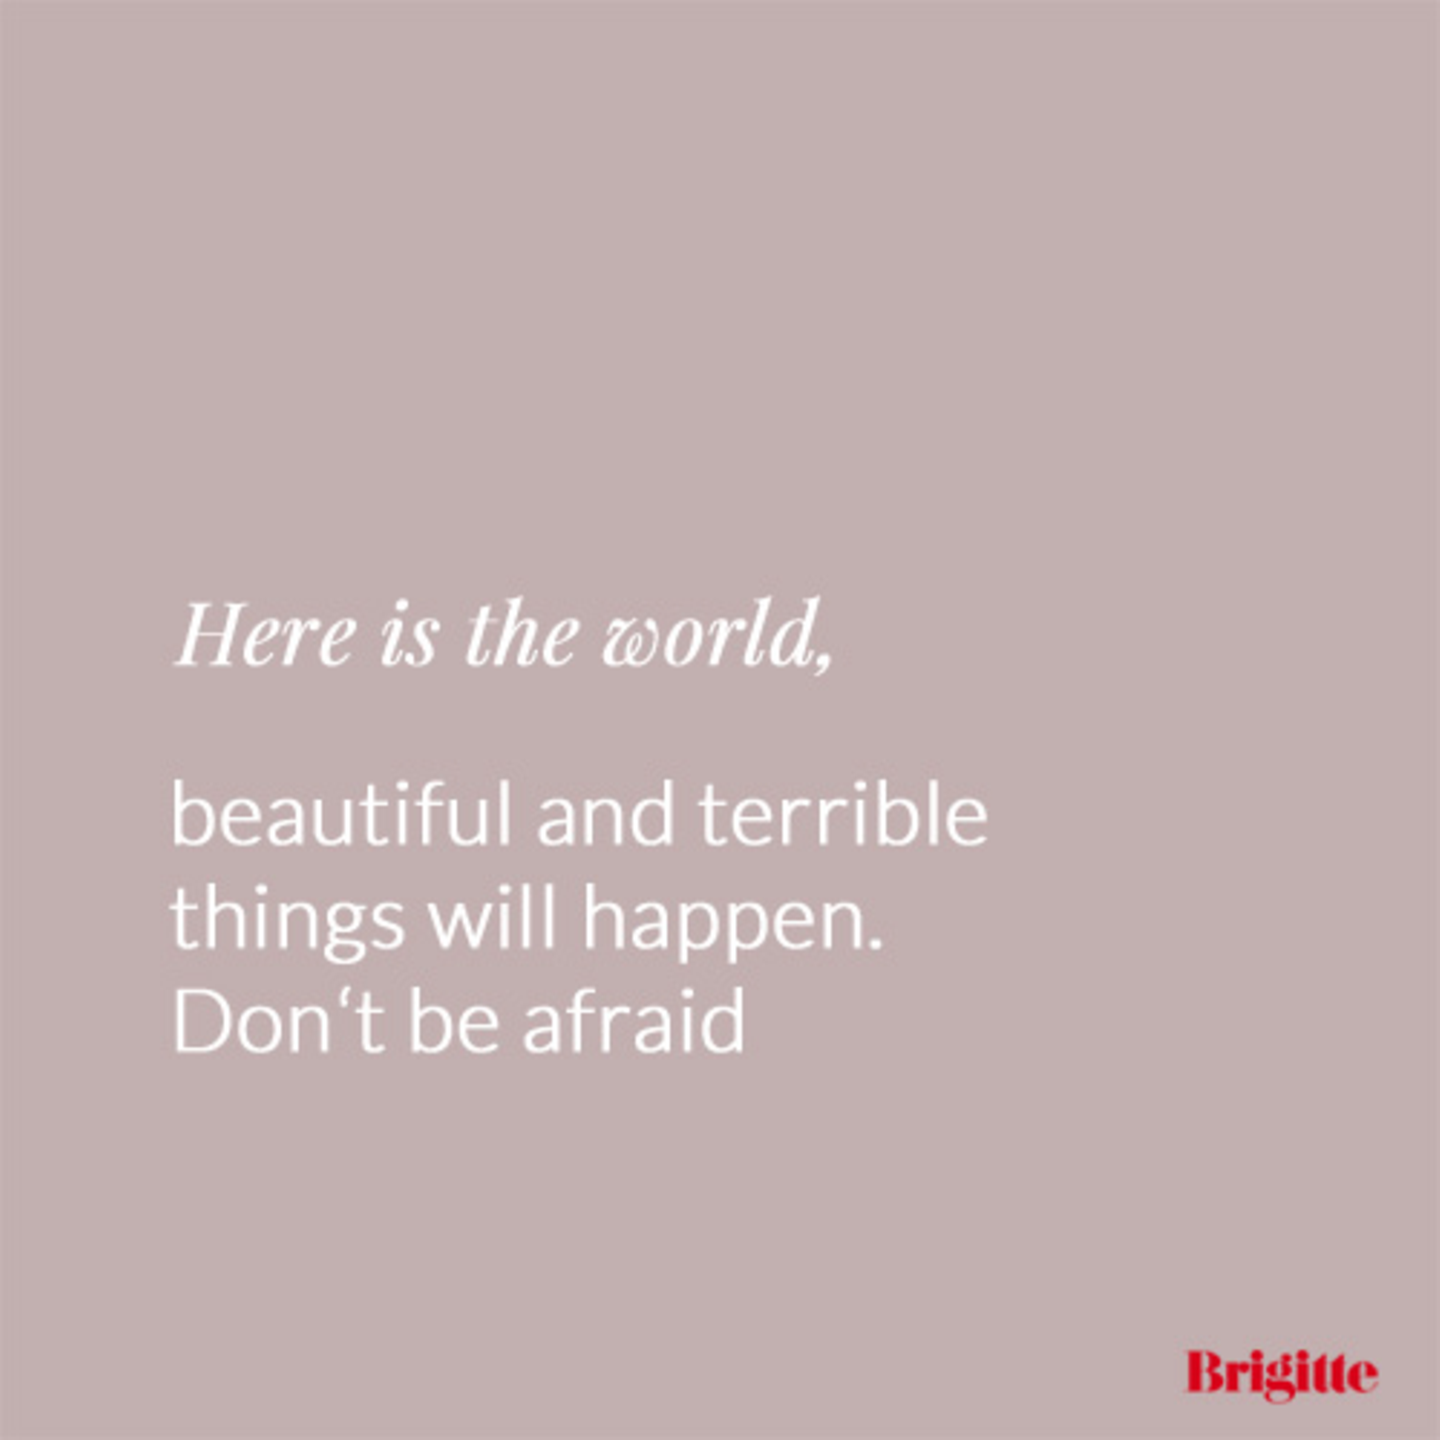 Here is the world, beautiful and terrible things will happen. Don't be afraid